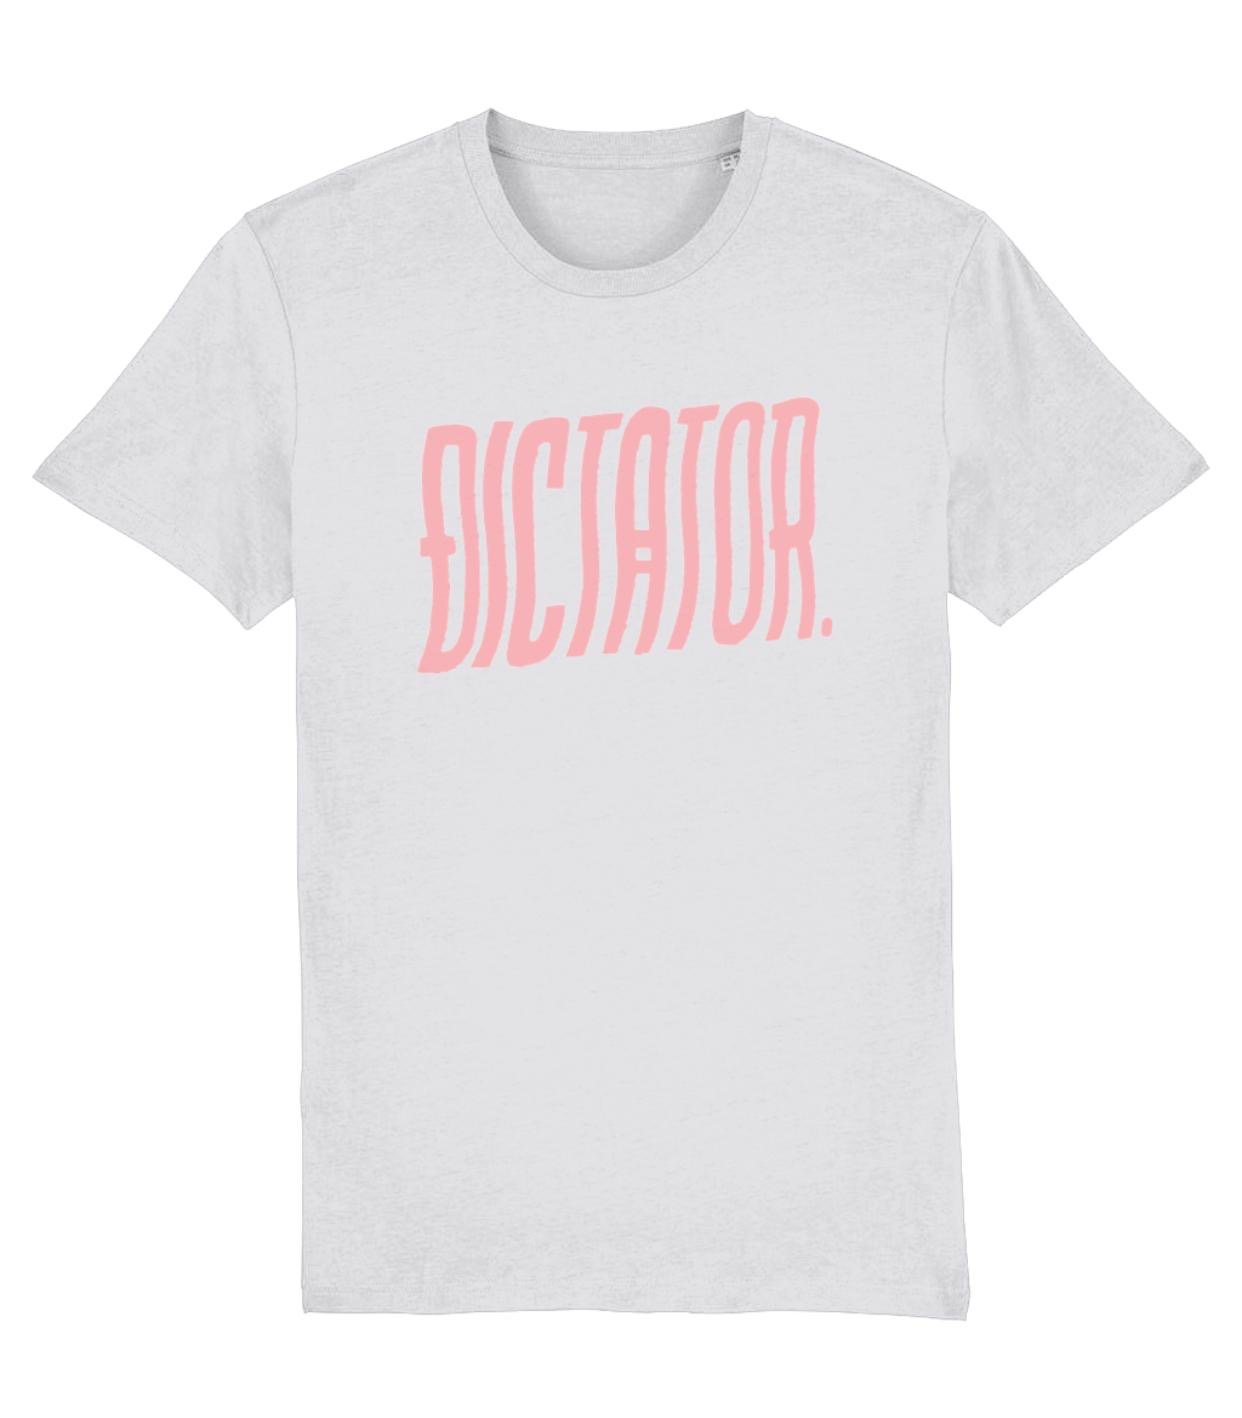 Image of Dictator Tee White/Pink